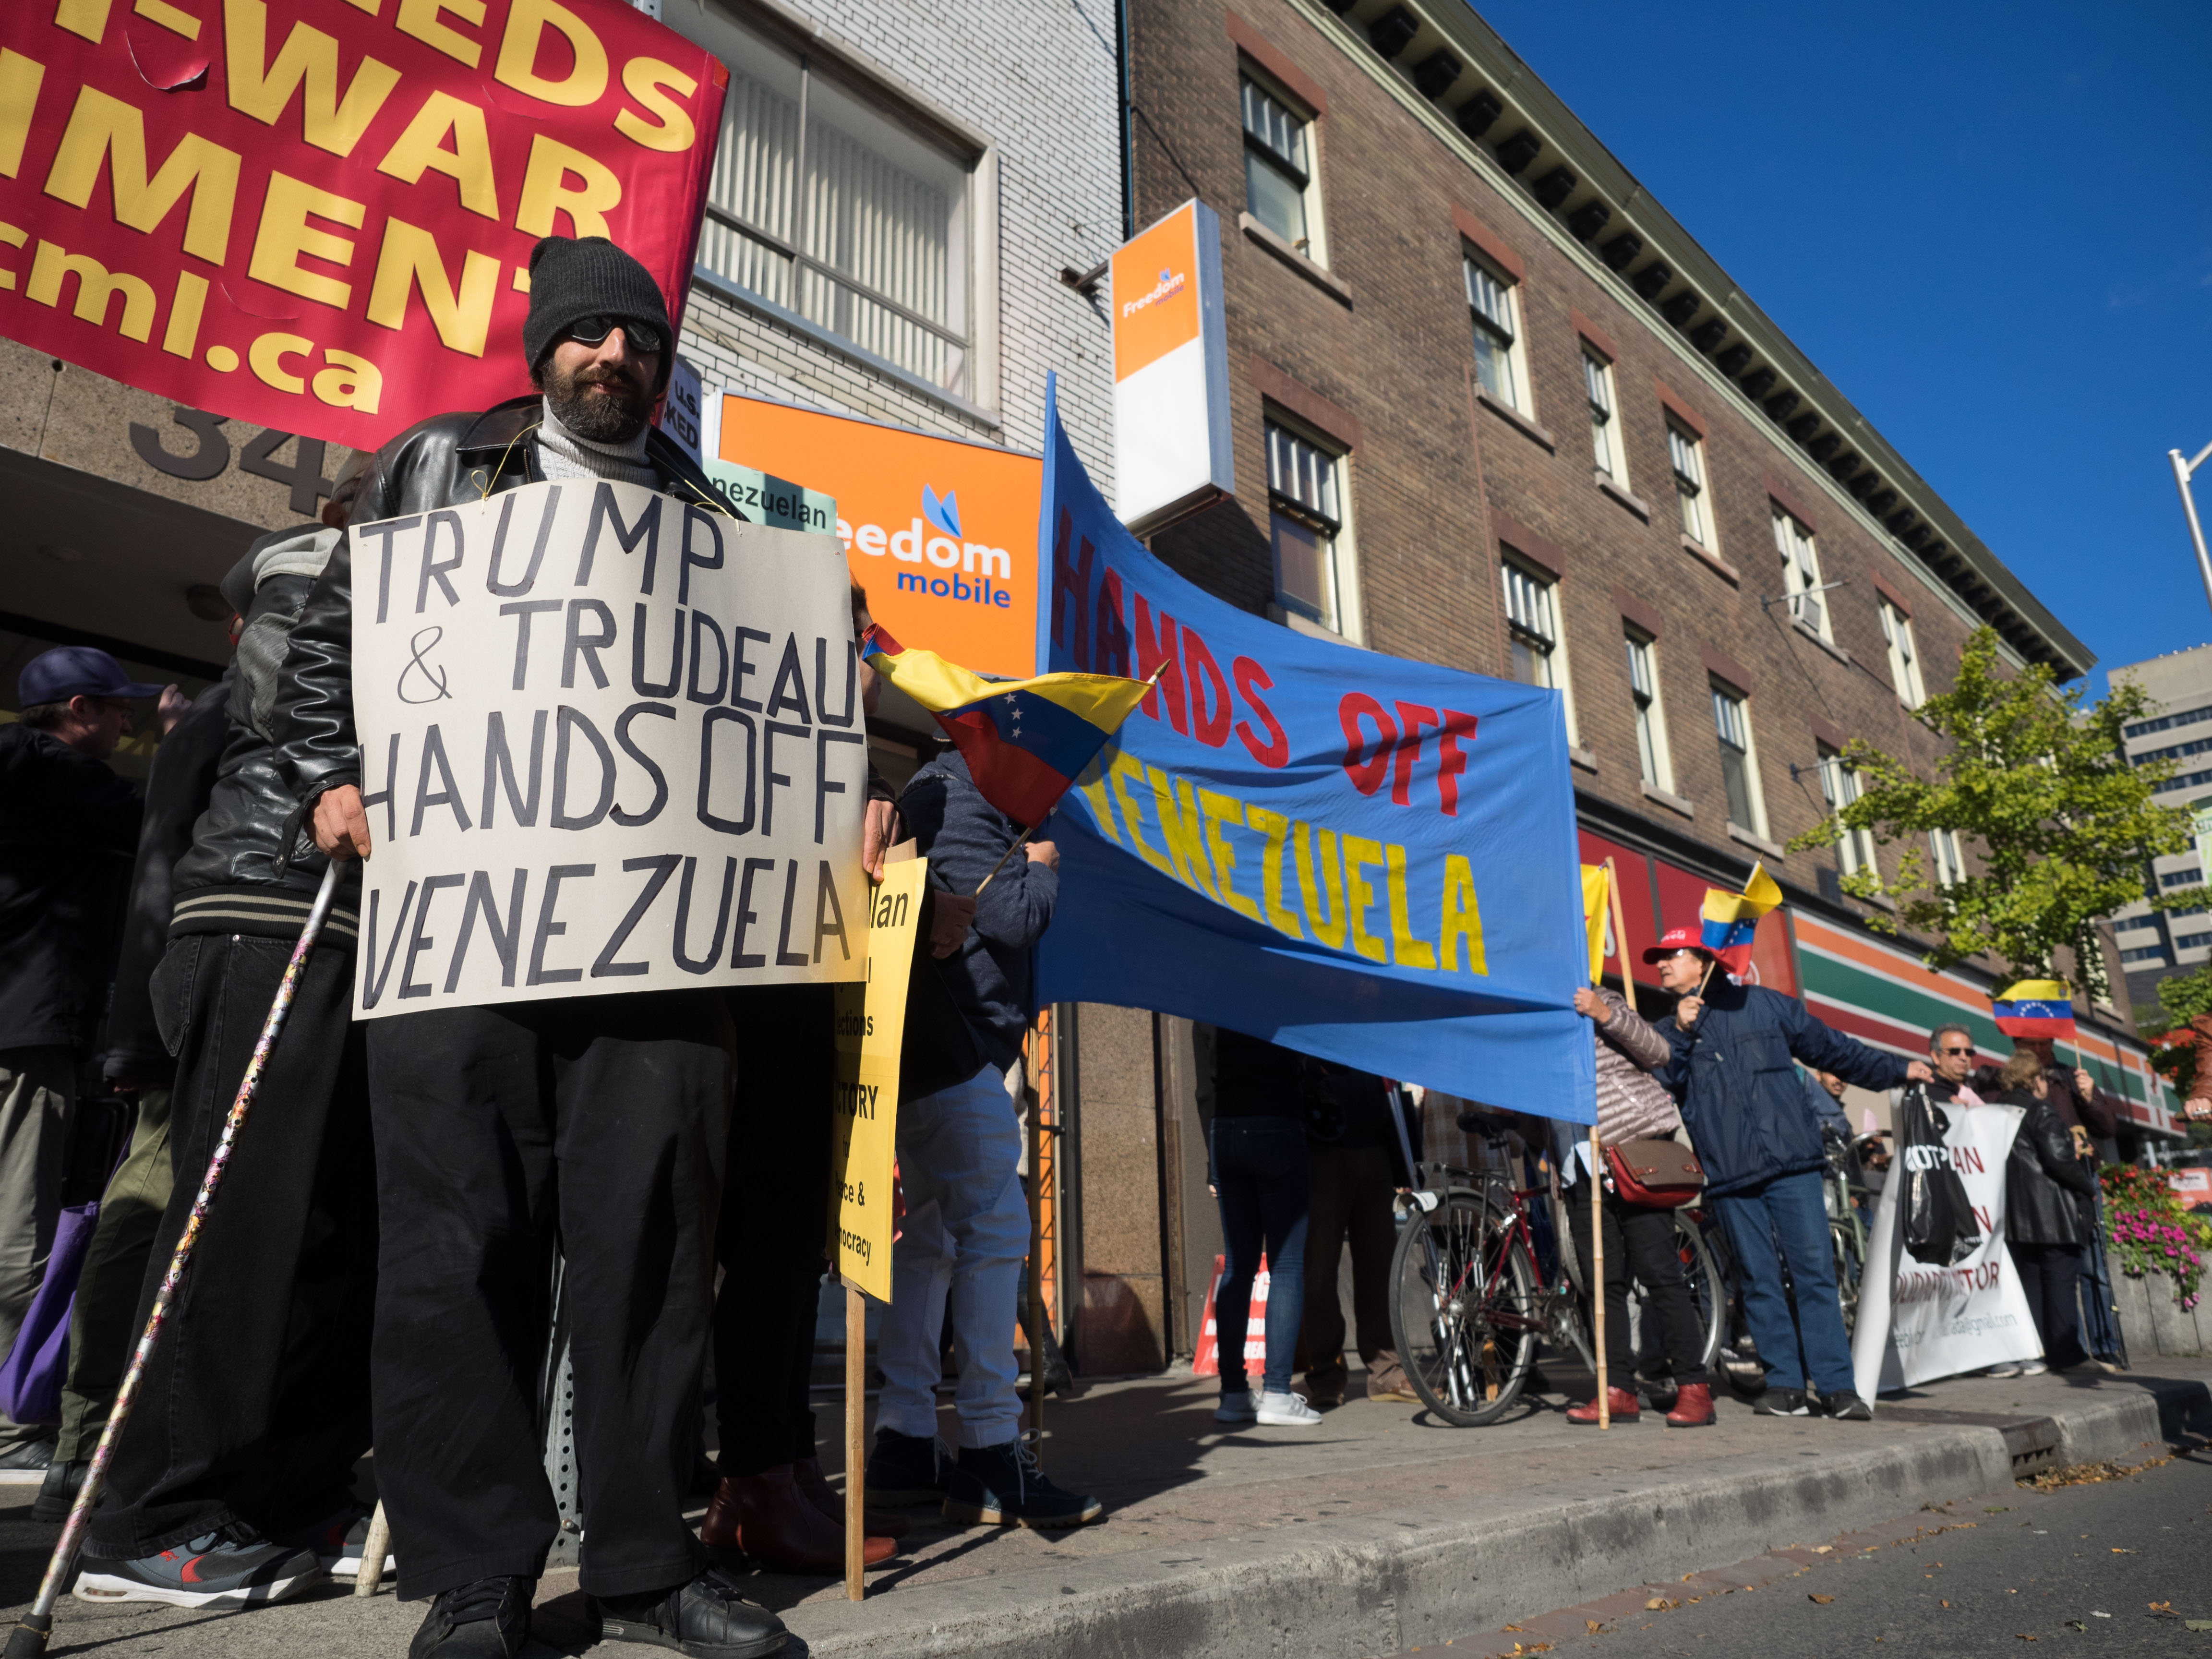 Demonstrators outside Foreign Affairs Minister Chrystia Freeland’s constituency office in Toronto. Image: José Luis Granados Ceja​